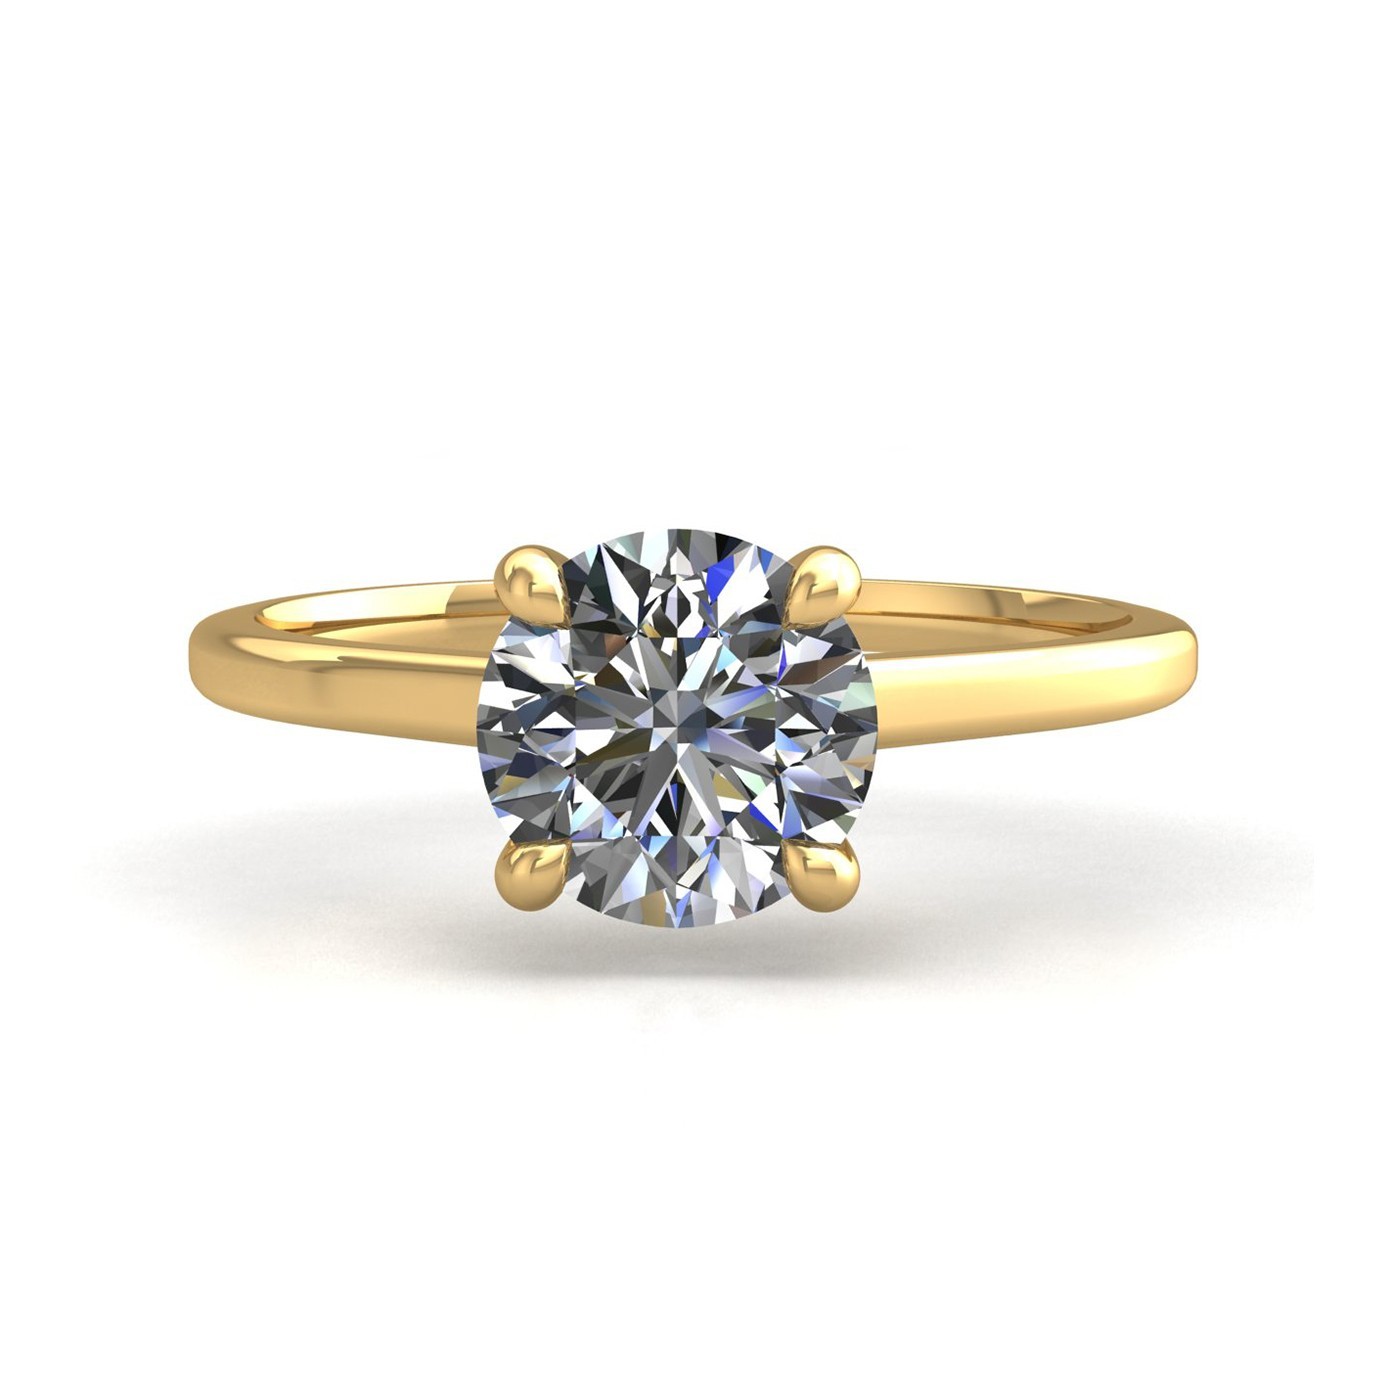 18k yellow gold  0,30 ct 4 prongs solitaire round cut diamond engagement ring with whisper thin band Photos & images